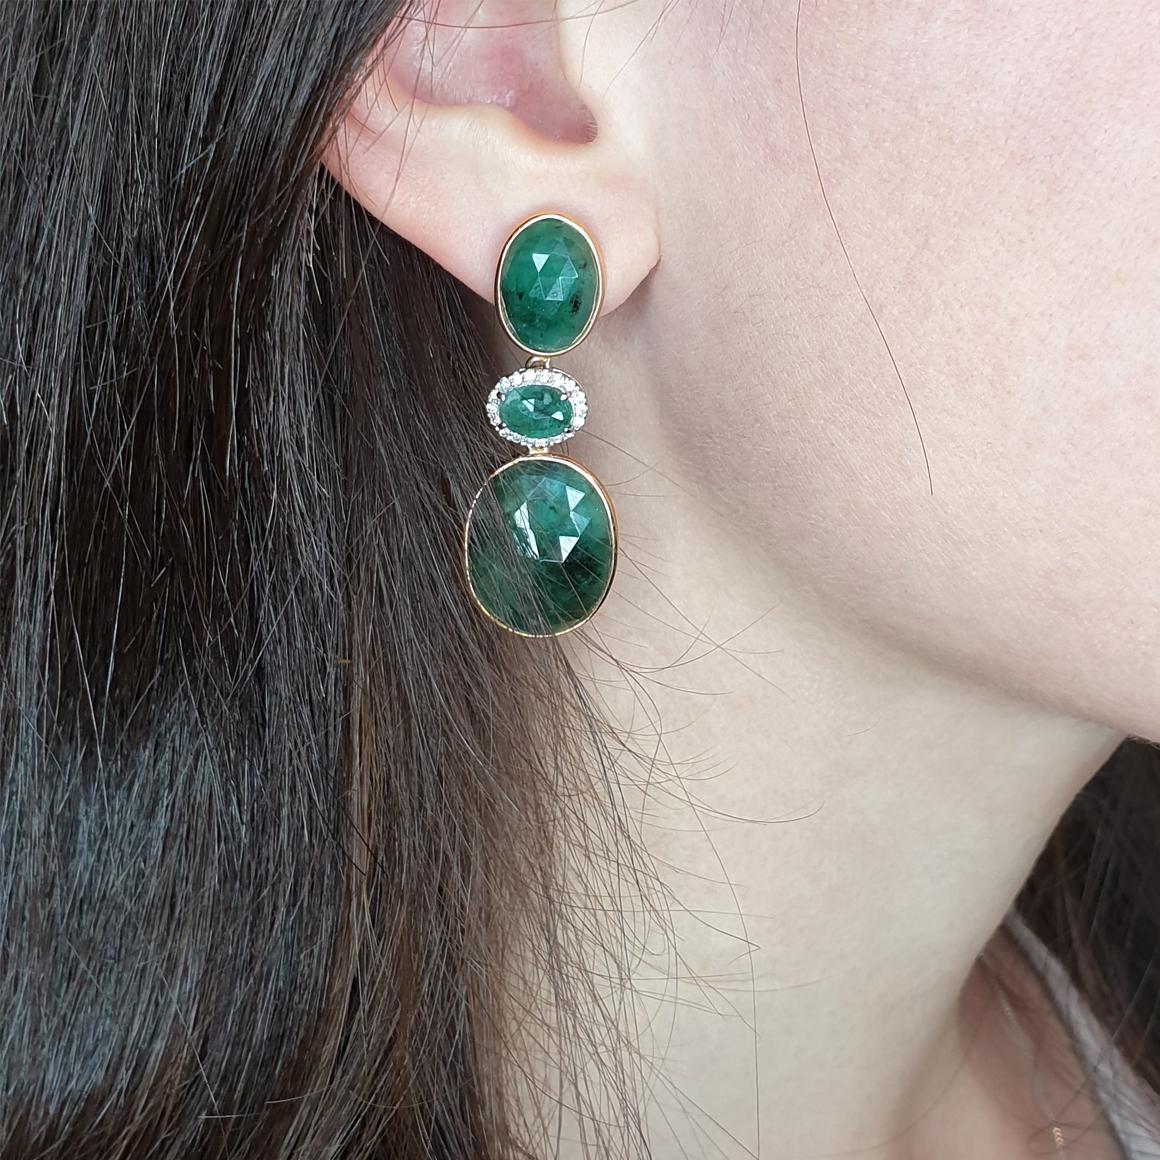 
Shiny  Emeralds , design and craftmanship handmade in Italy by Stanoppi Jewellery since 1948.
Earrings in 18k rose and white gold with emerald  (oval cabochon cut, size: 5x7mm) and   ( emerald root : 14x18mm and 9x12mm) and white Diamonds cts 0,18